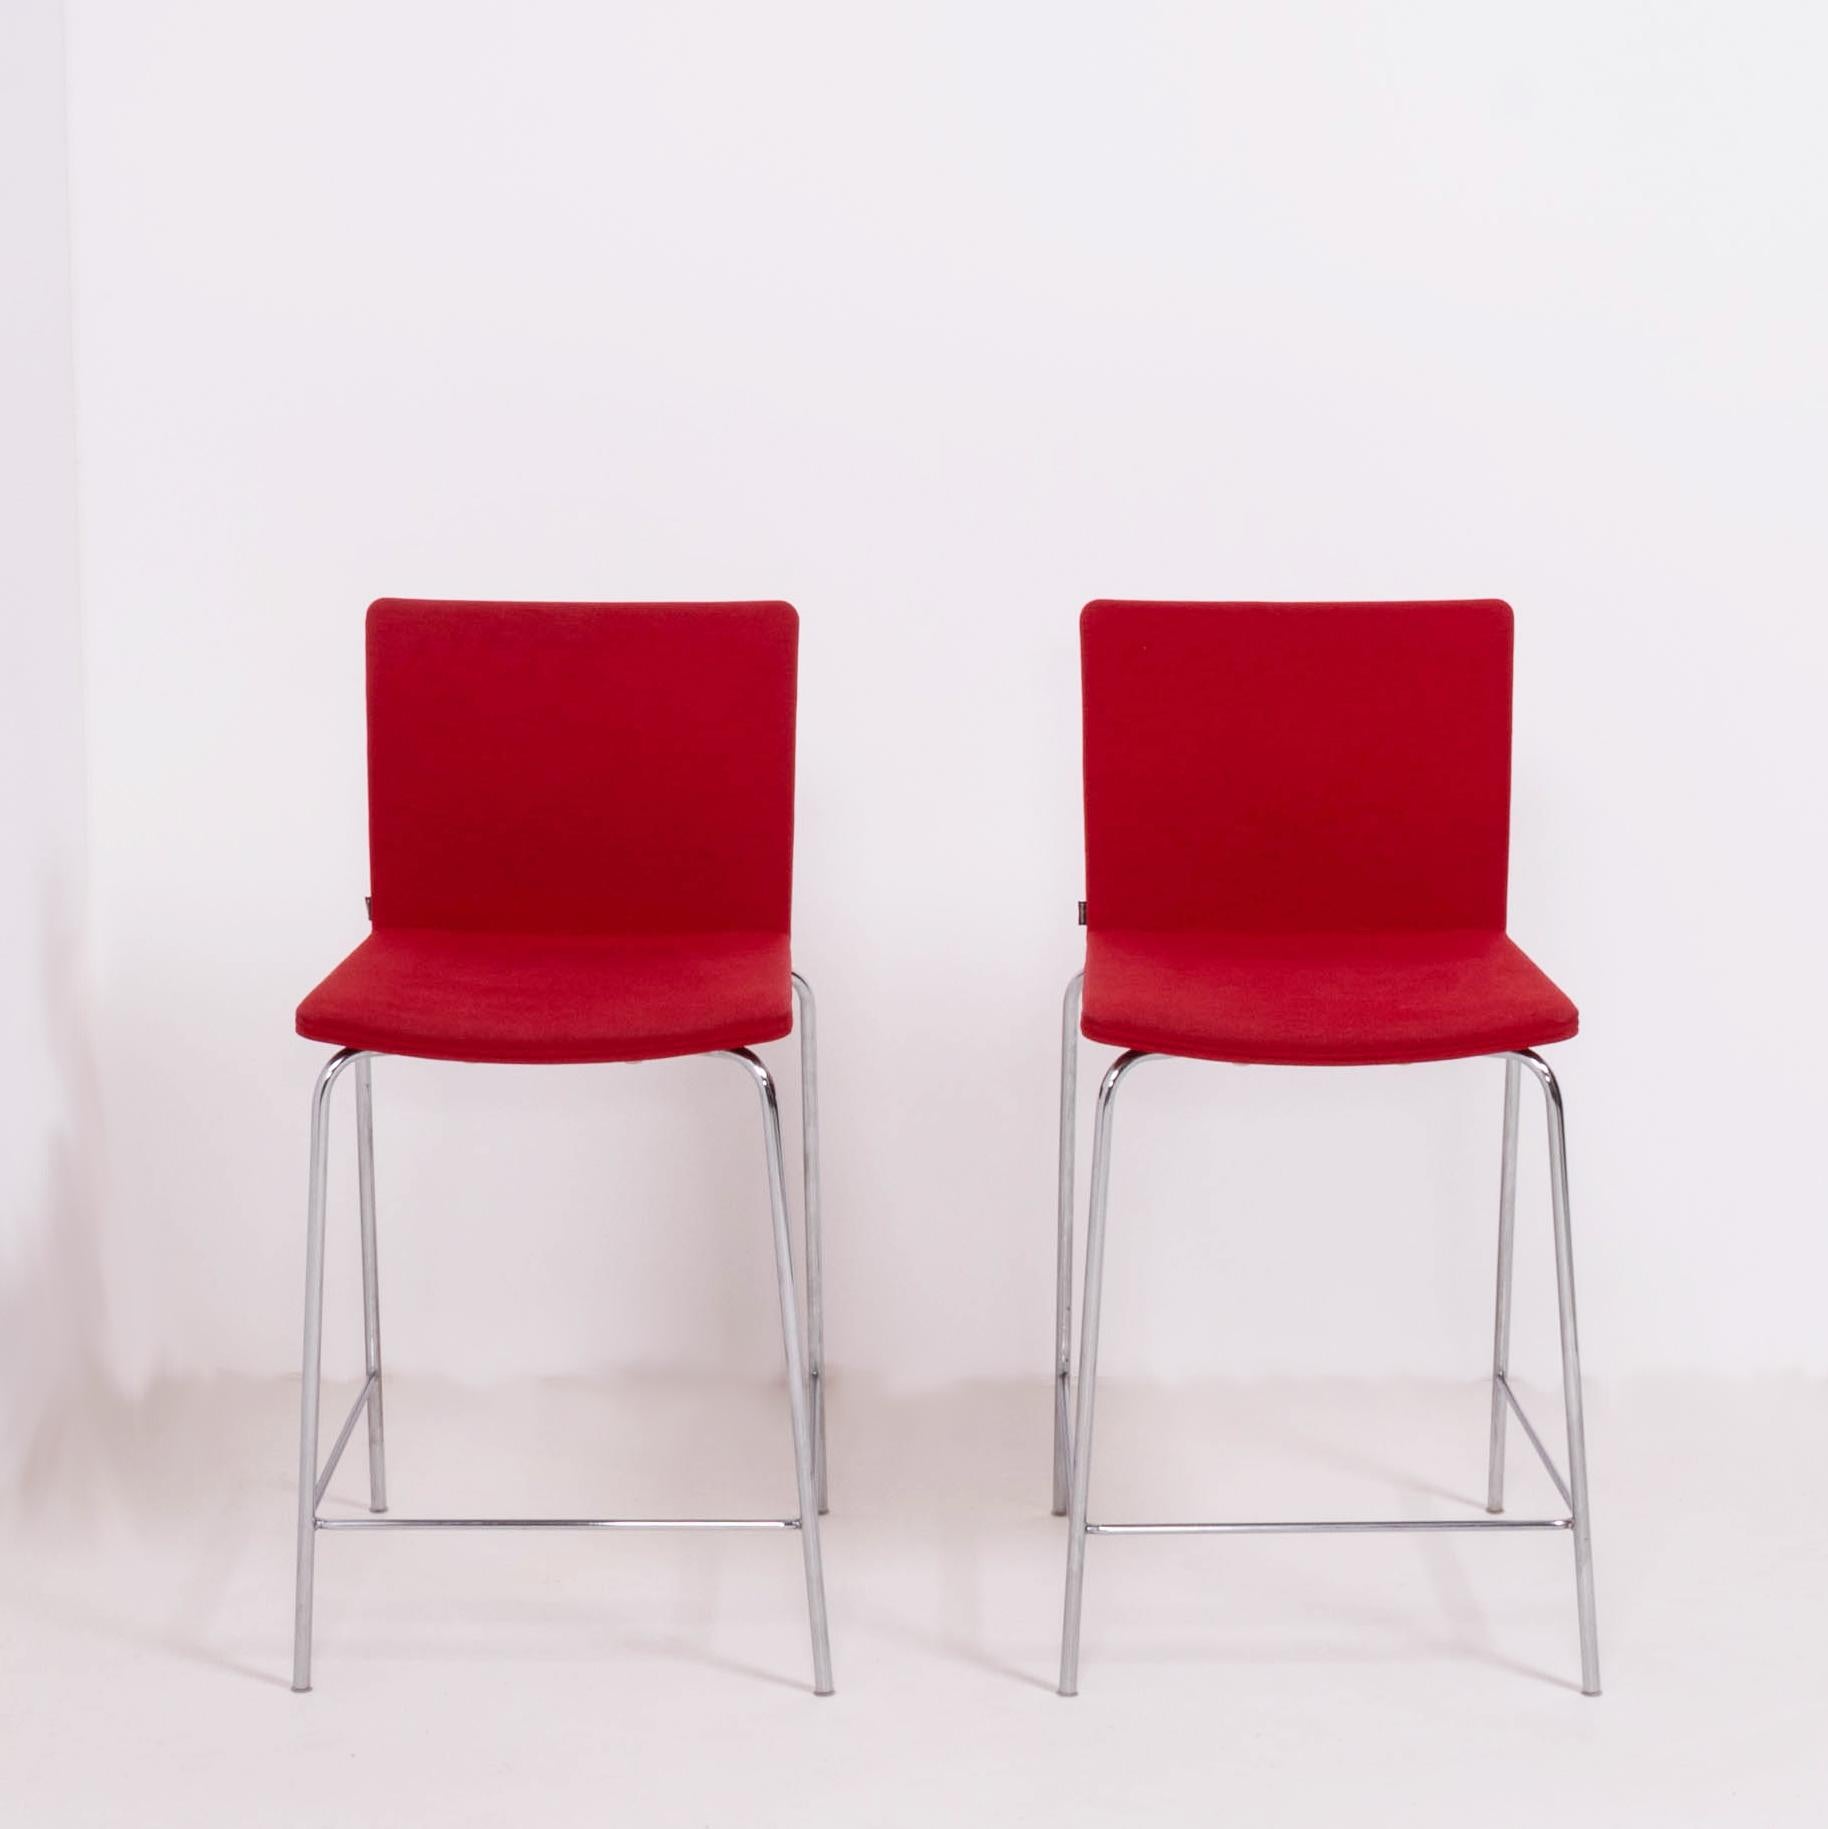 Originally designed by Mario Mazzer for Poliform in 2003, the Nex stool is the epitome of sleek and modern design.

Featuring a chromed metal frame with a foot rail, the seats are molded for comfort and upholstered in a bold red fabric.

This